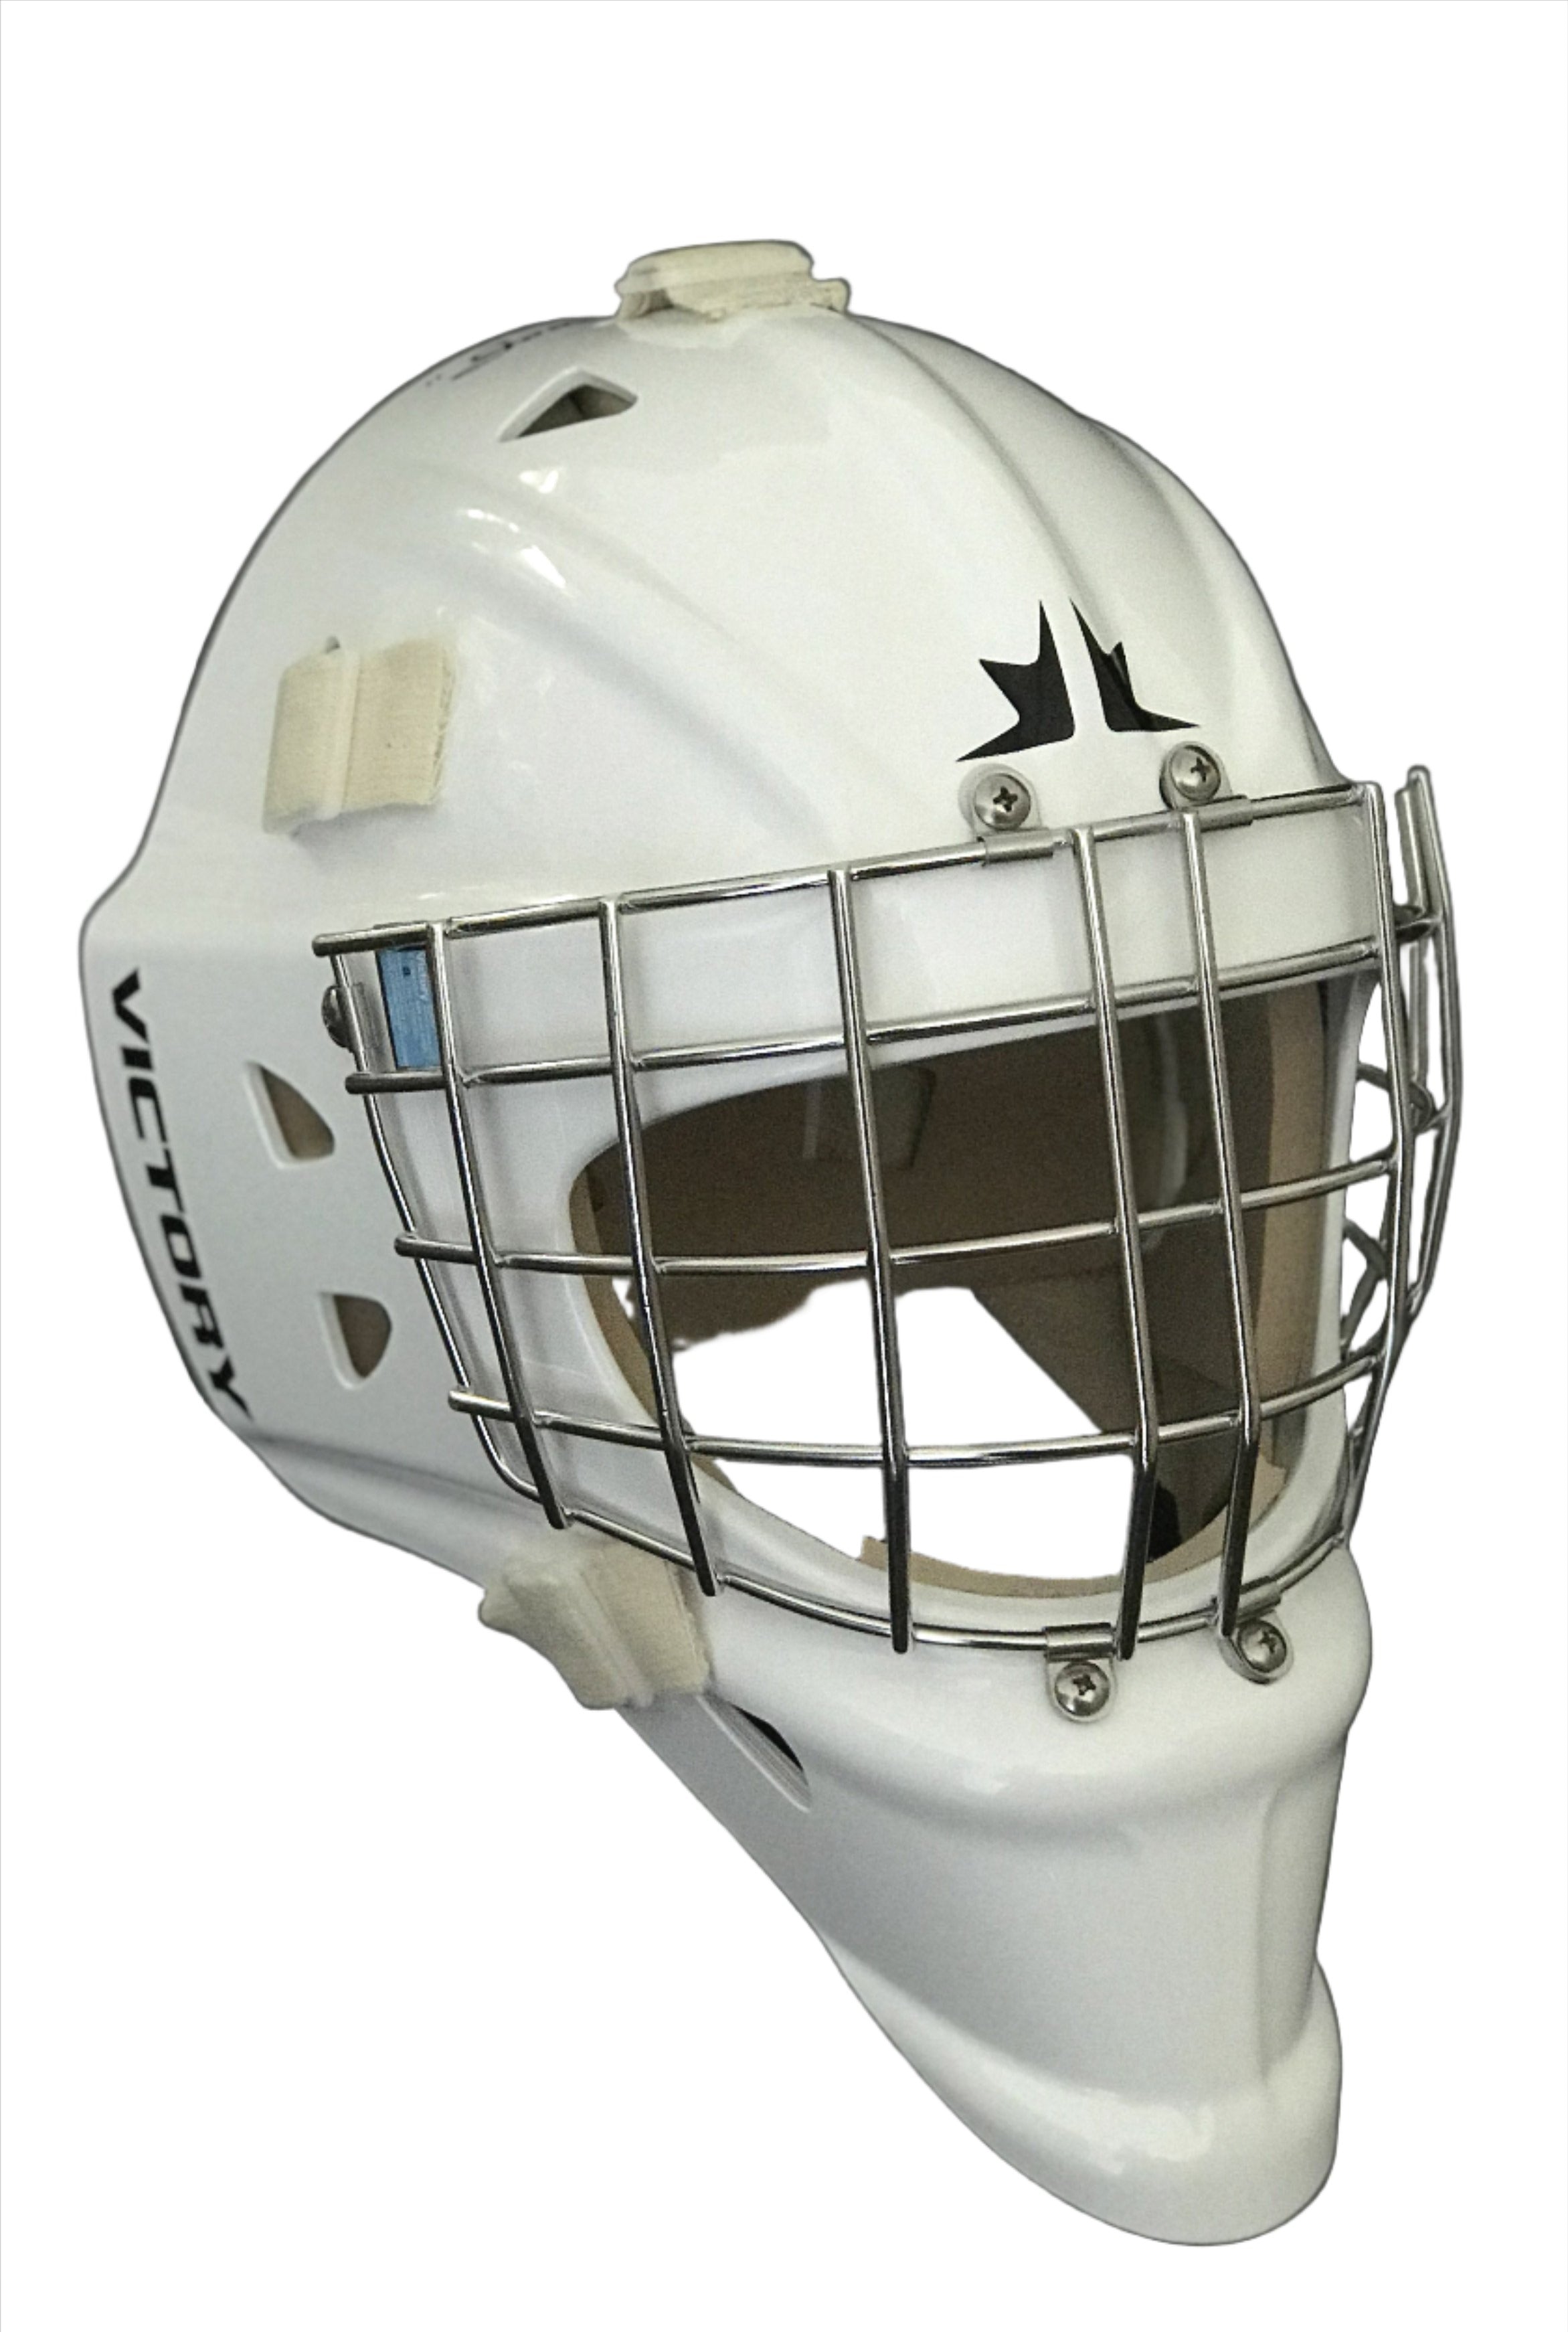 Blue Jays: Former player once wore a goalie mask during a game